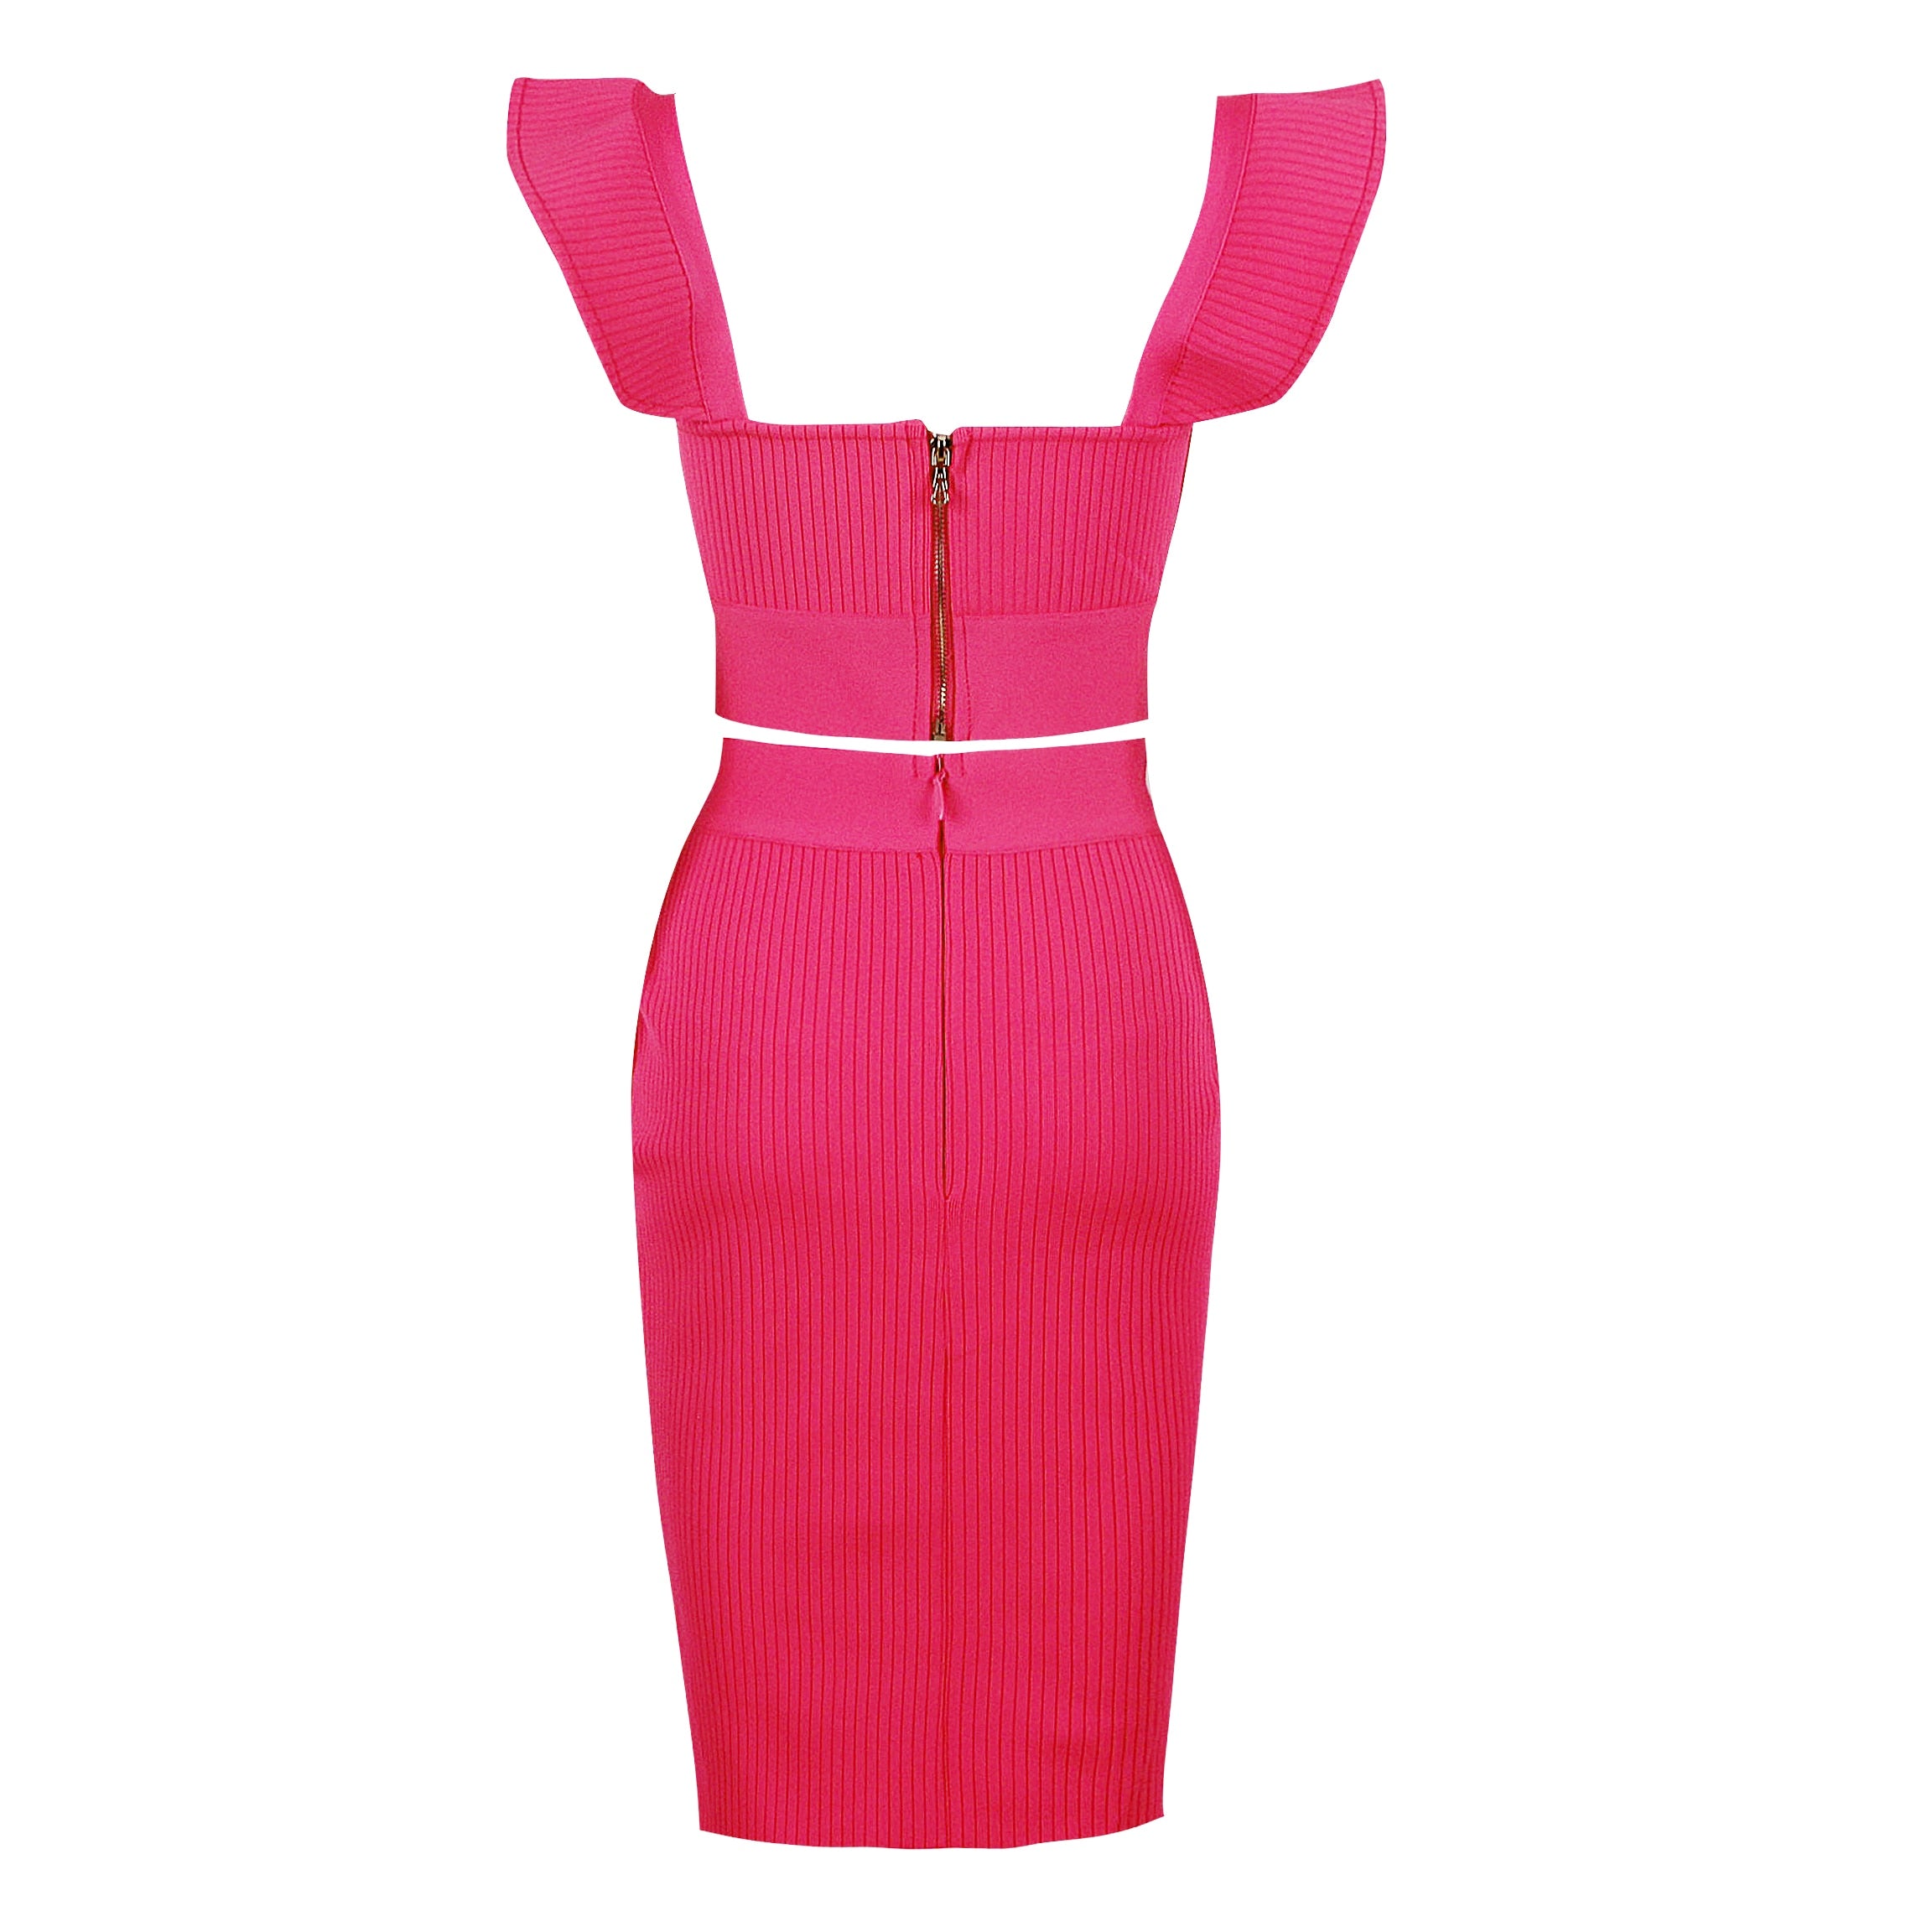 Two Pieces Bandage Dress